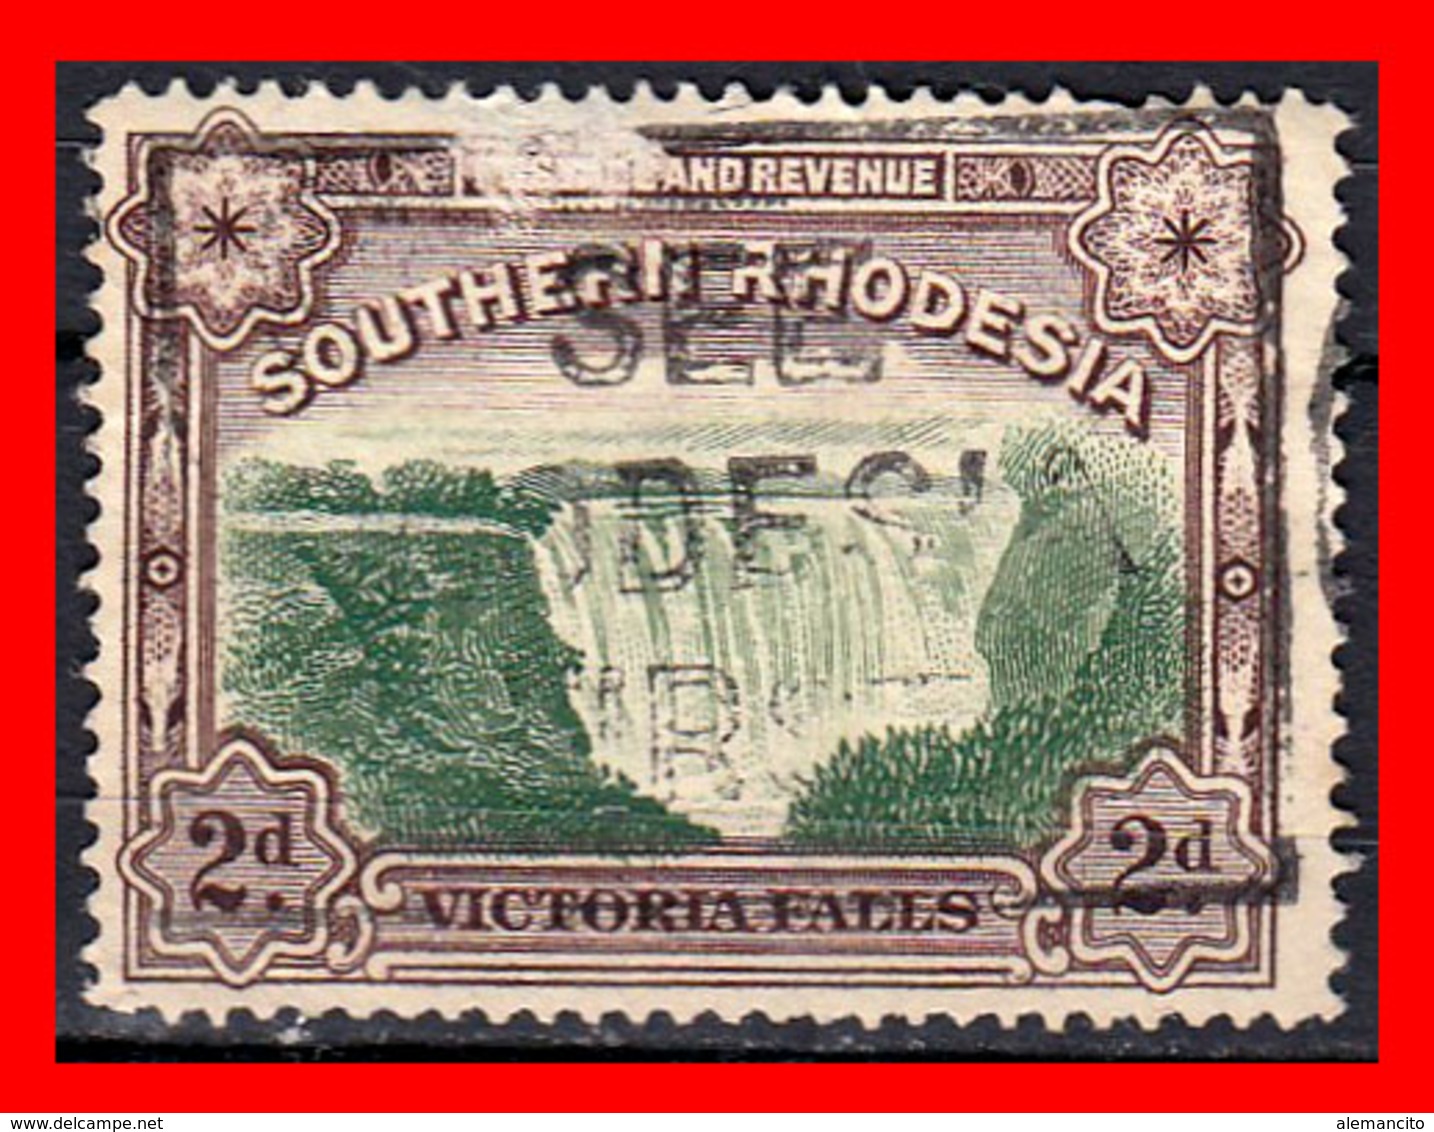 AFRICA../ SOUTHERN RHODESIA STAMP AÑO 1931-37 - Oficiales